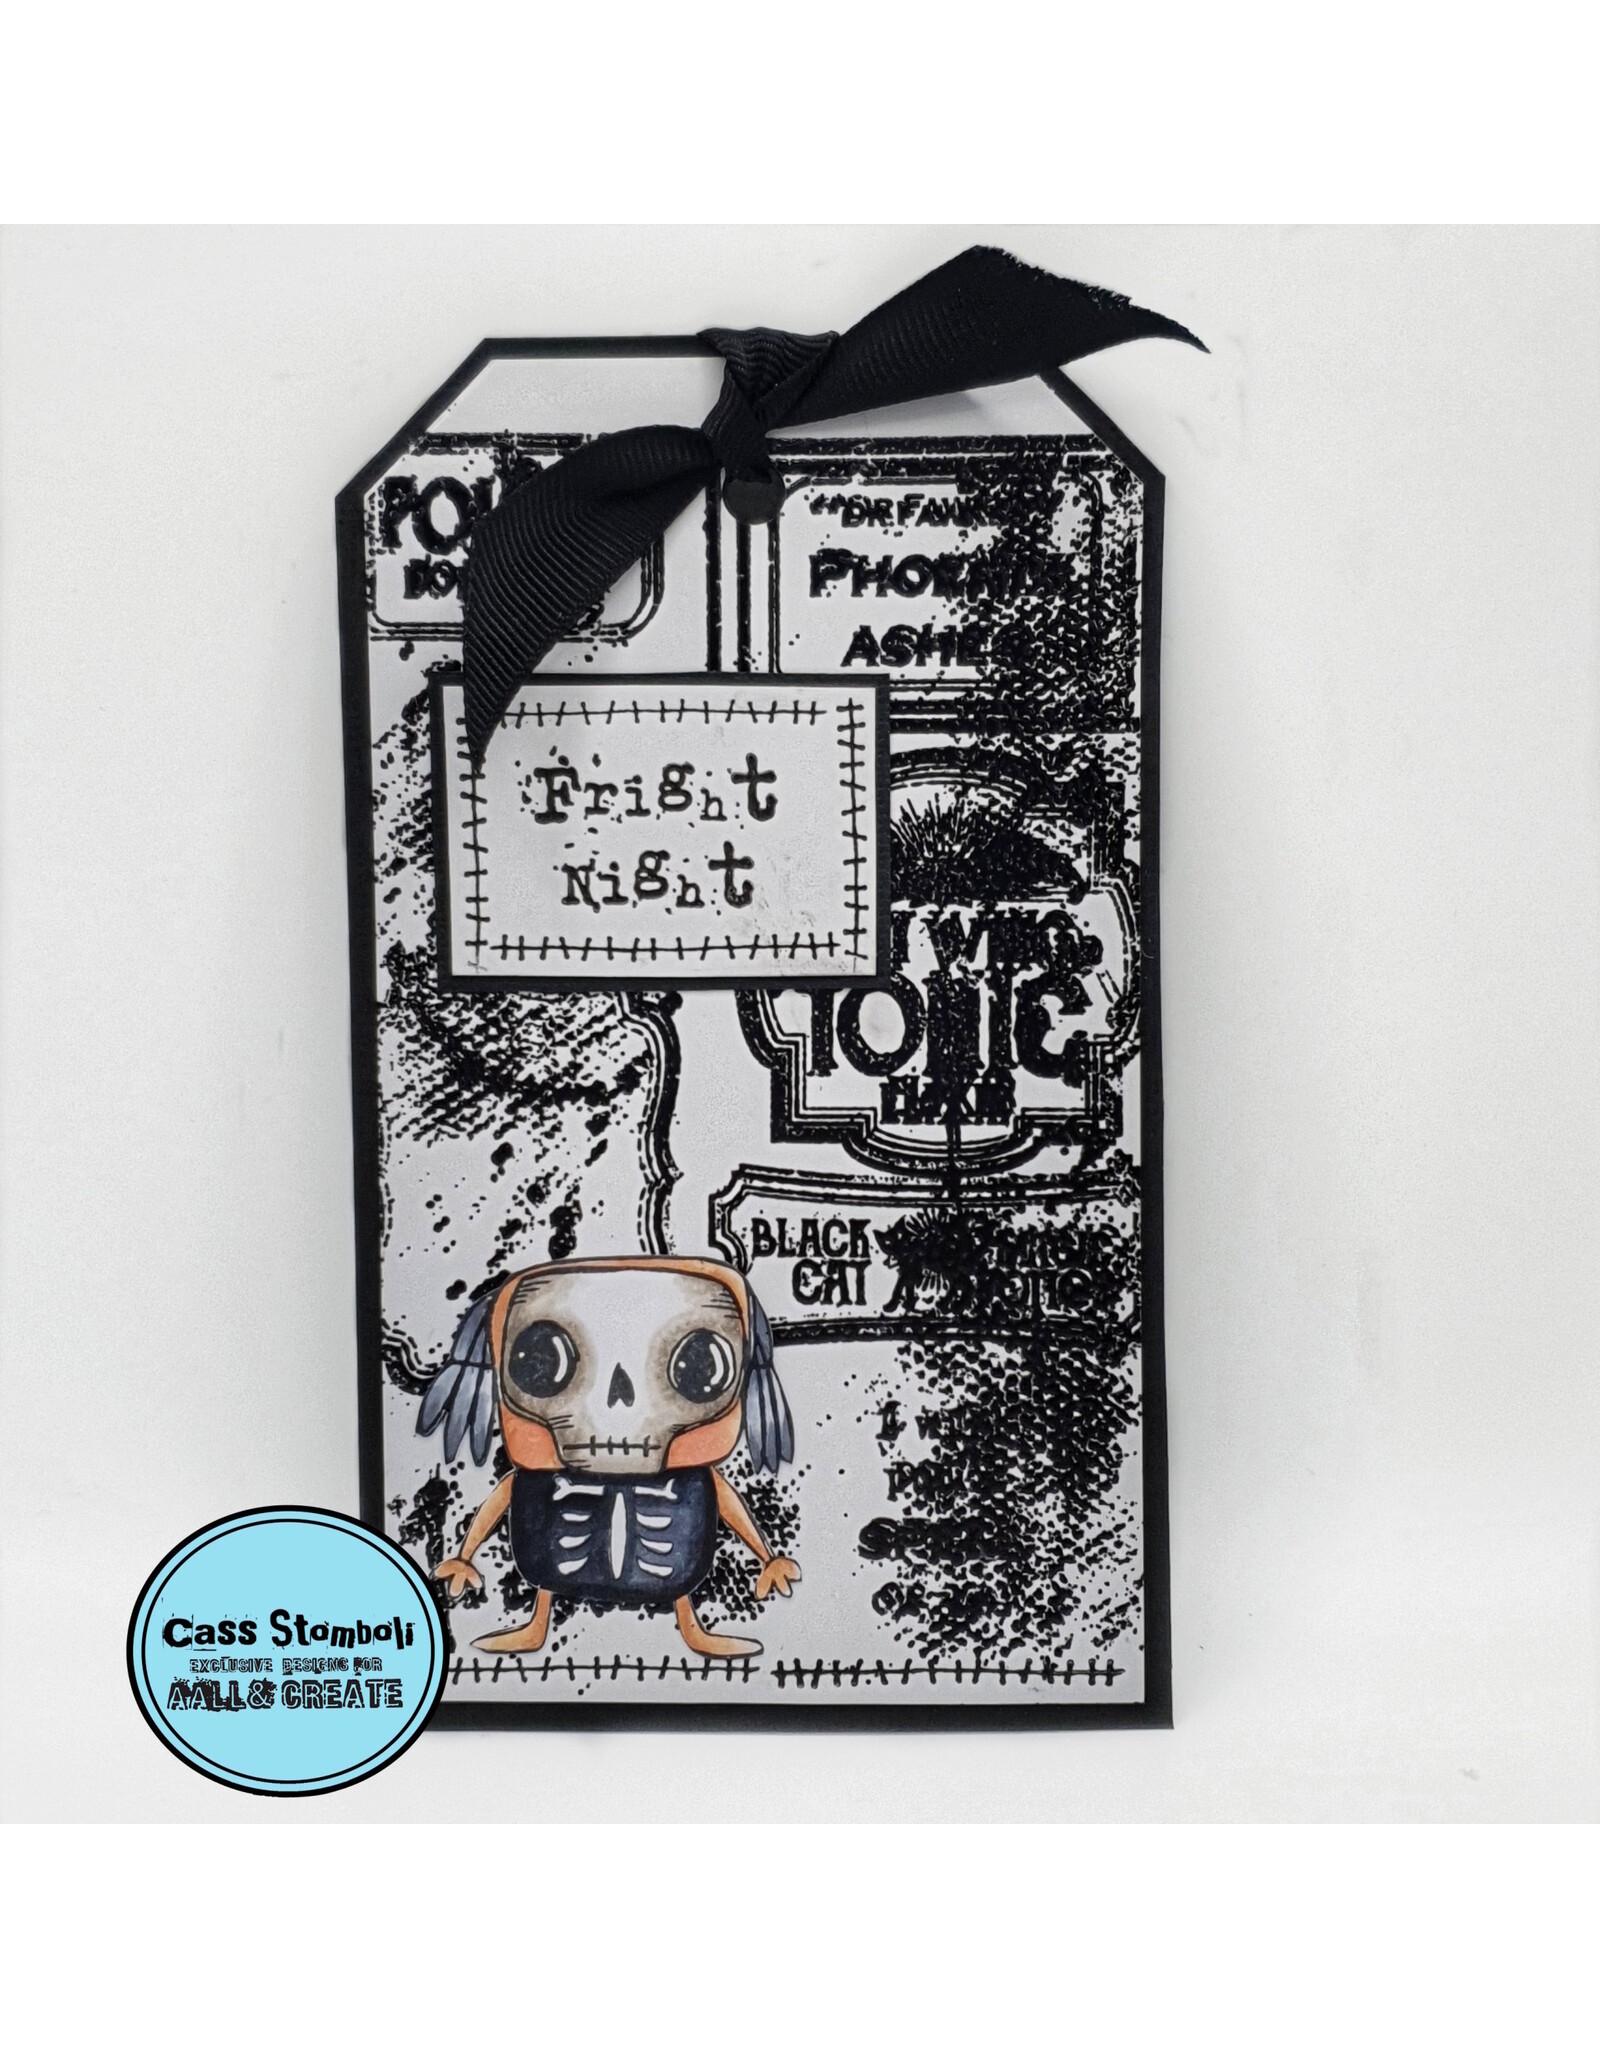 AALL & CREATE AALL & CREATE JANET KLEIN #951 FRIGHT NIGHT A7 CLEAR STAMP SET